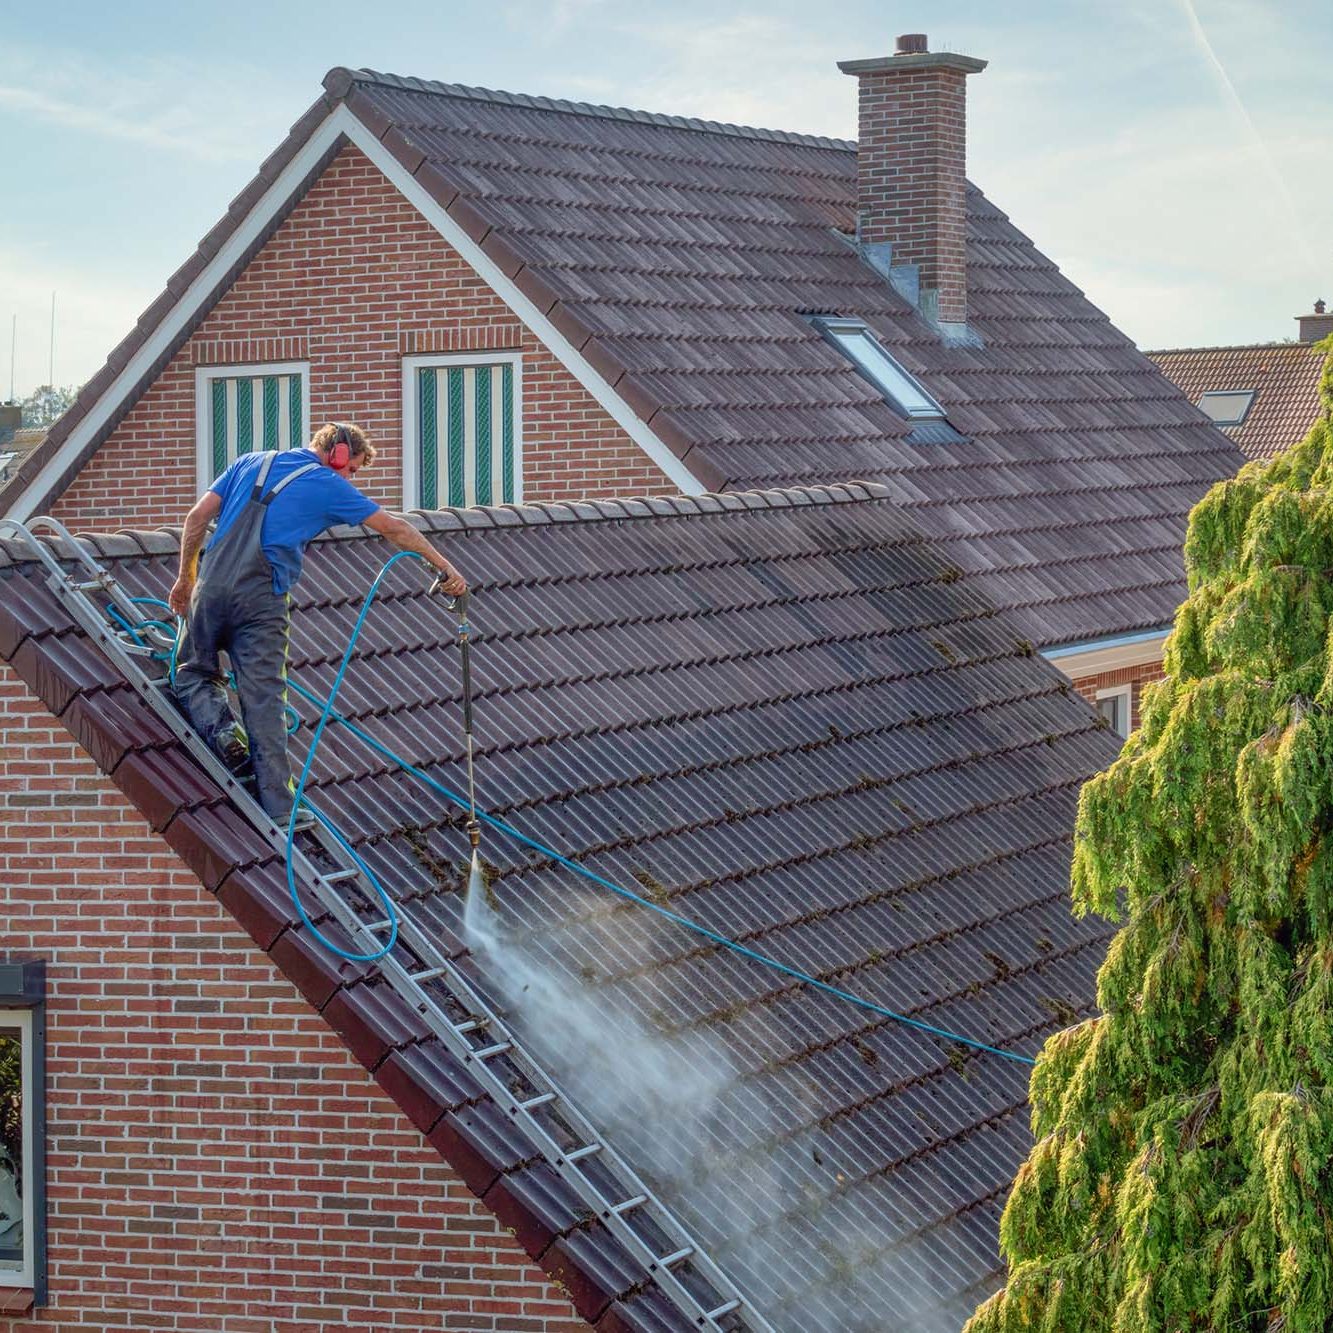 Urk, The netherlands - September 15, 2020: Cleaner with pressure washer at roof of house cleaning the roof tiles, removing moss and weed